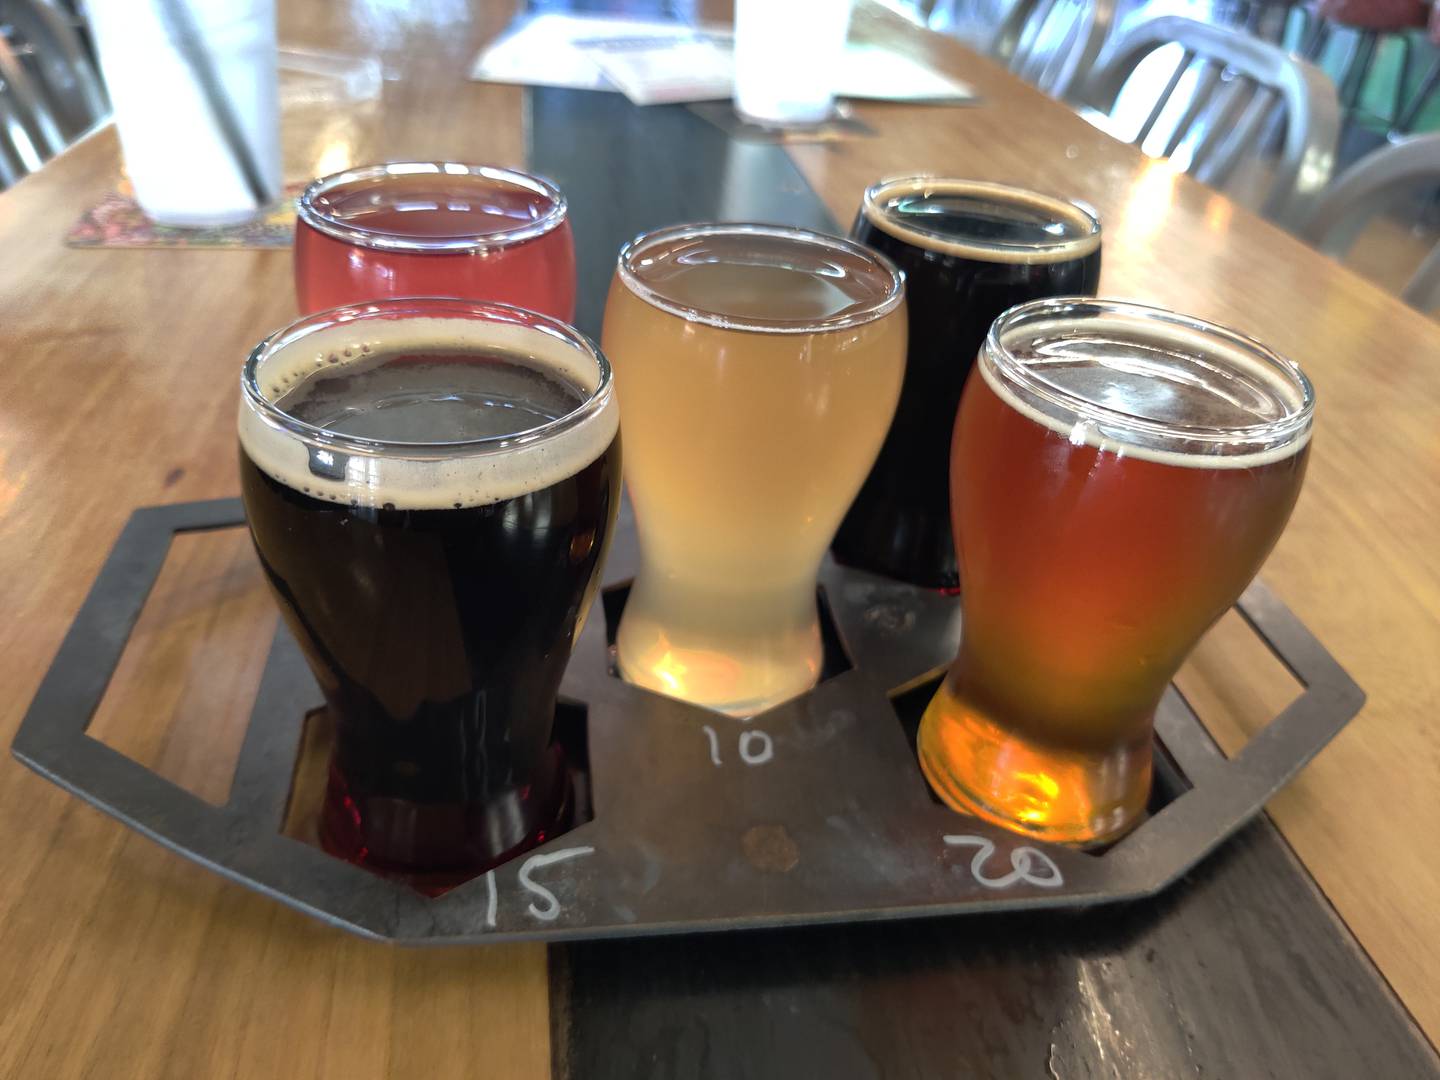 A flight of beer, cider and mead at Obscurity Brewing